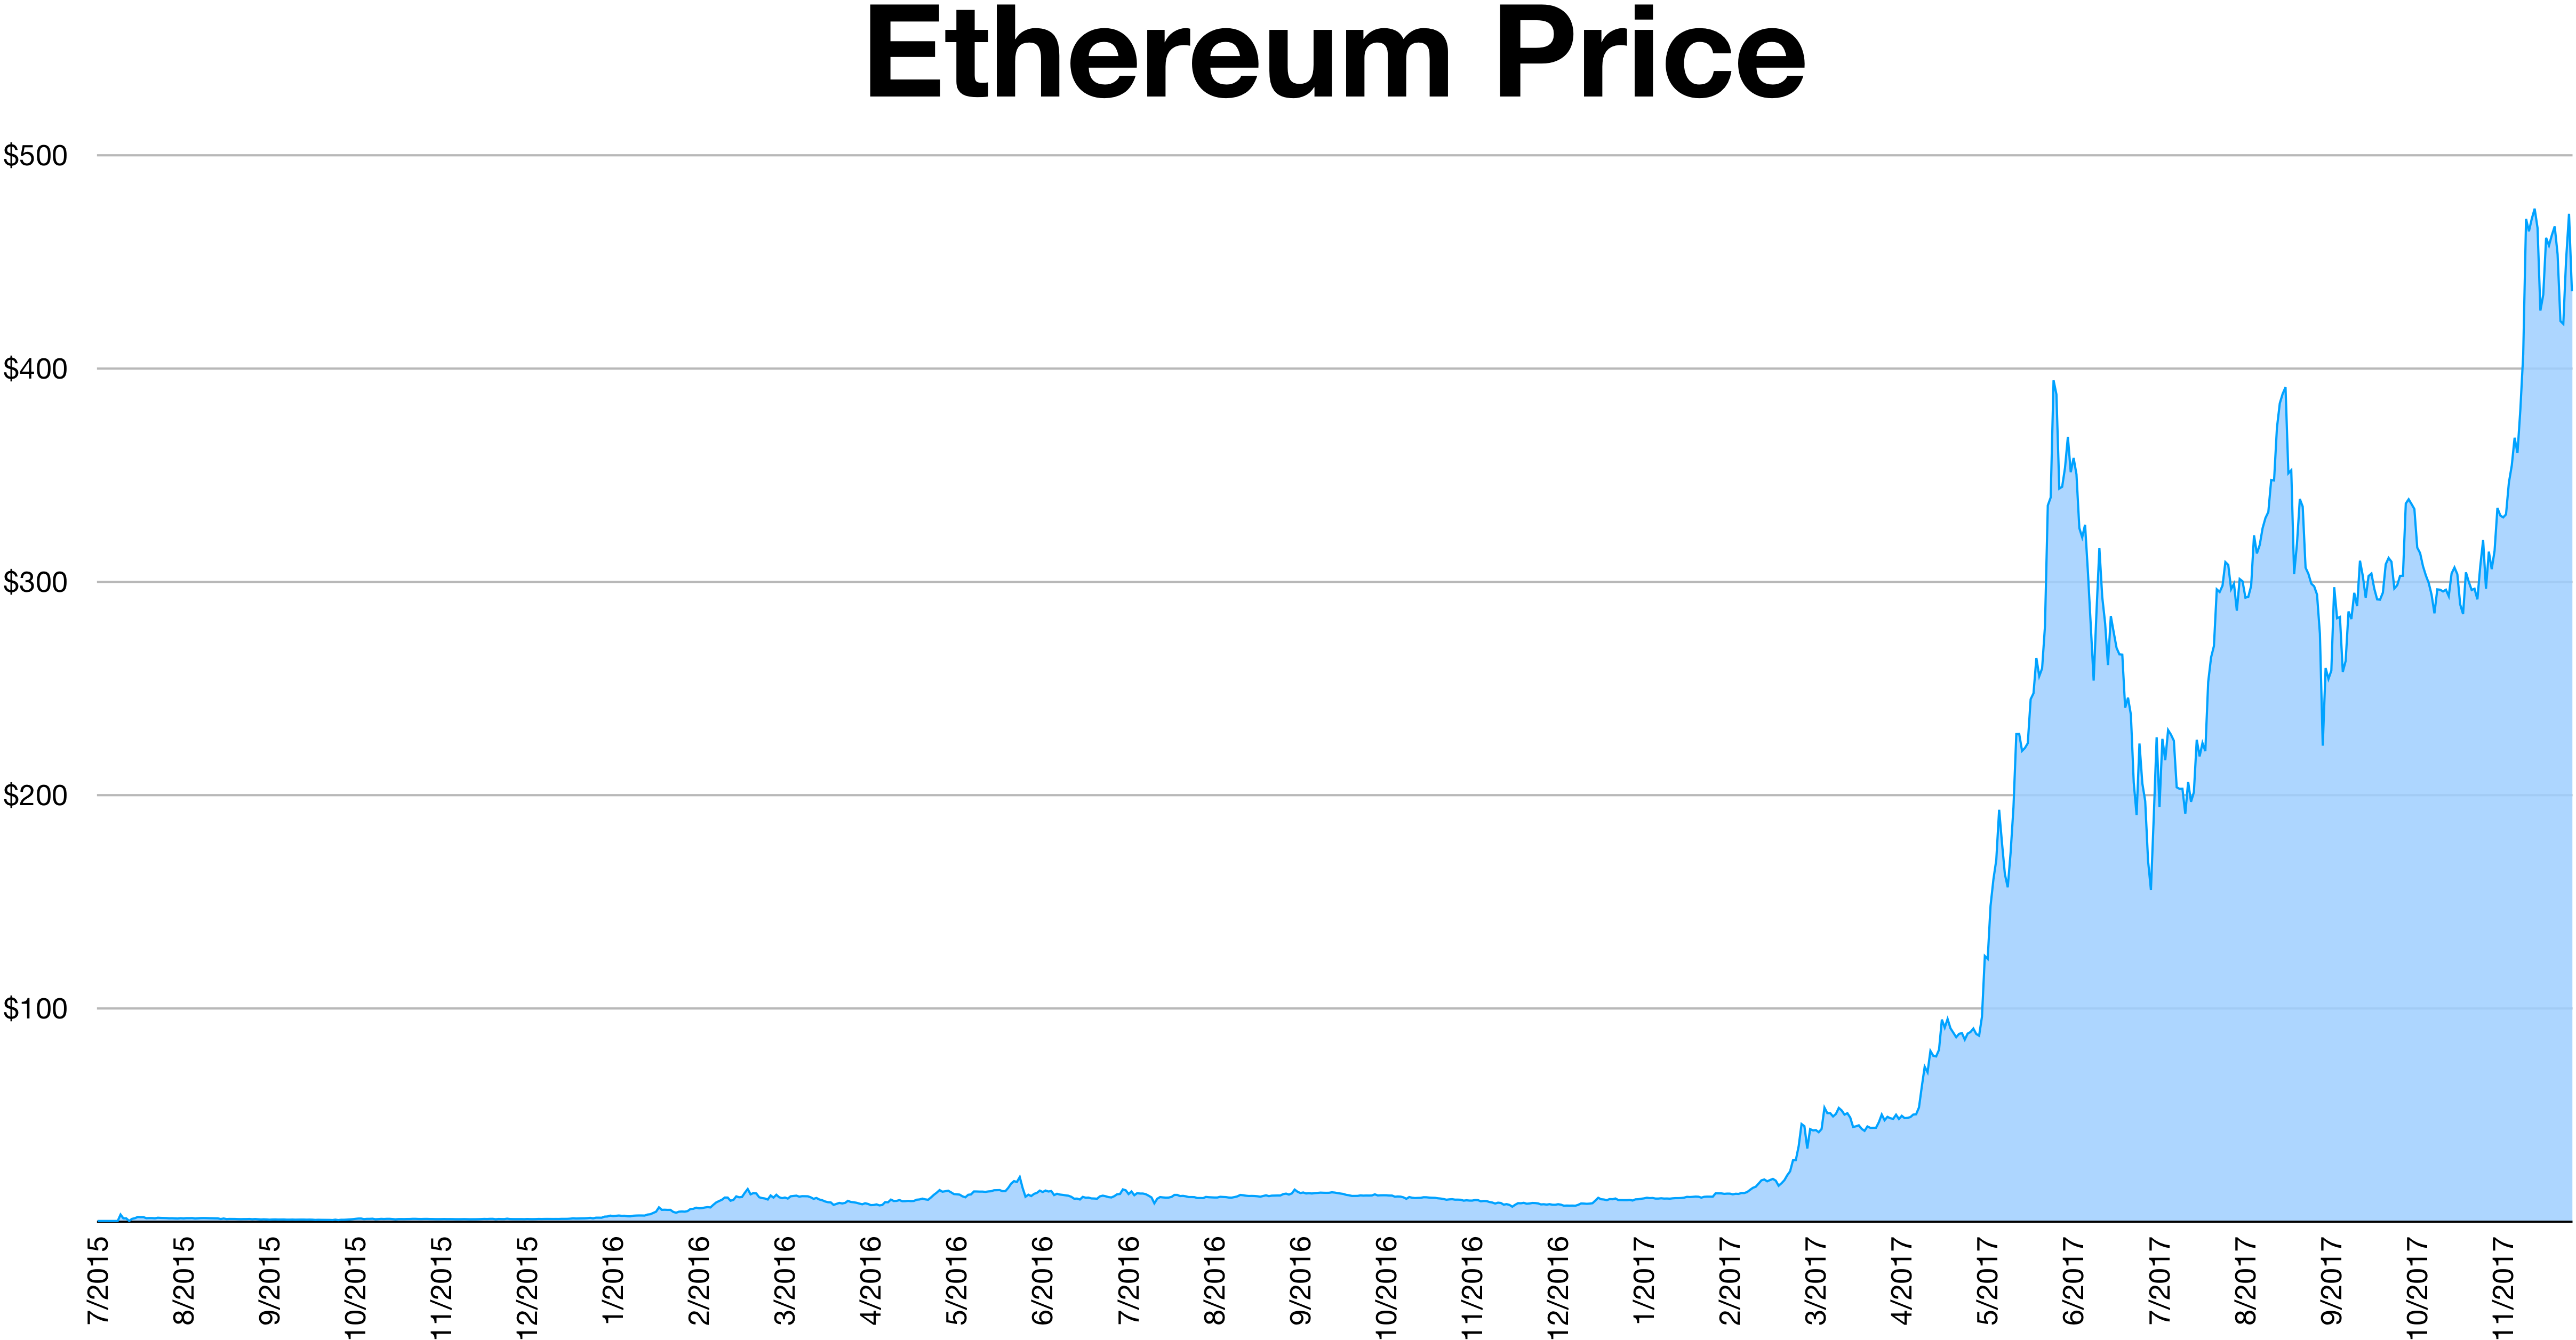 Complete Ethereum Price History Chart with Market Cap & Trade Volume